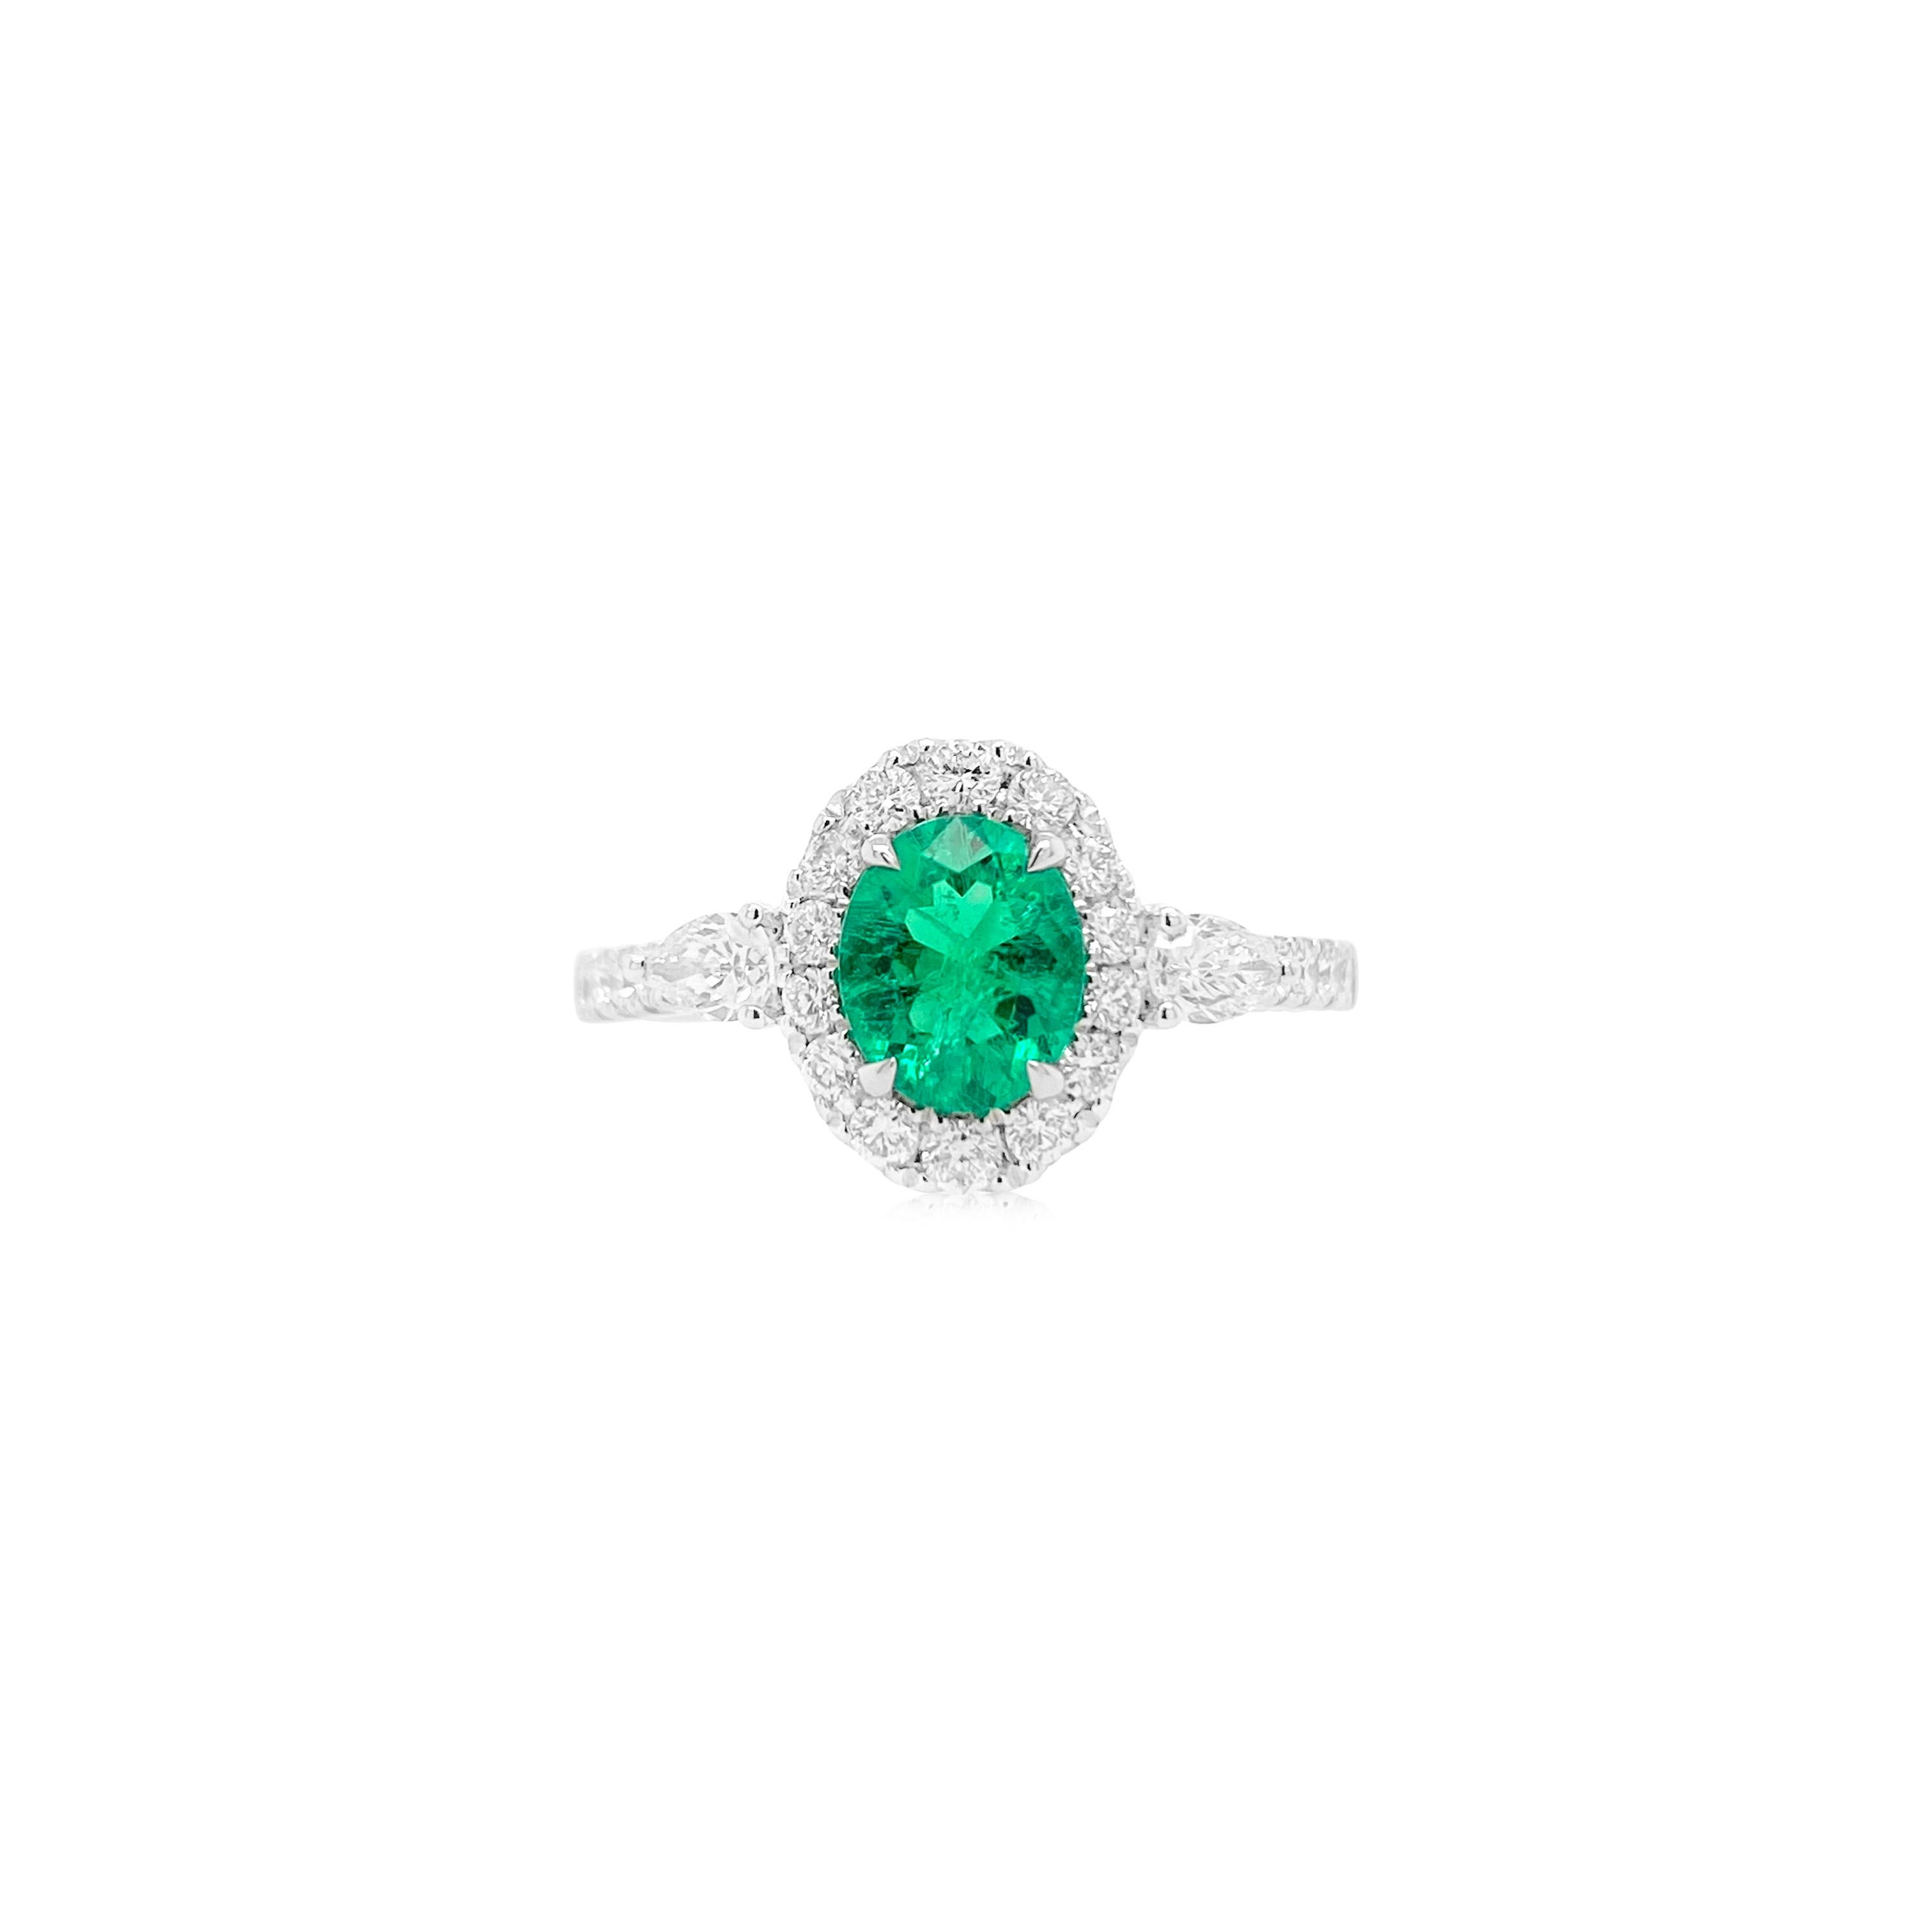 Elevate your style with our exquisite Oval Shape Natural Colombian Emerald Ring, adorned with stunning Pear Shape White Diamonds. This captivating piece seamlessly blends elegance and nature's beauty, making it a timeless symbol of sophistication.